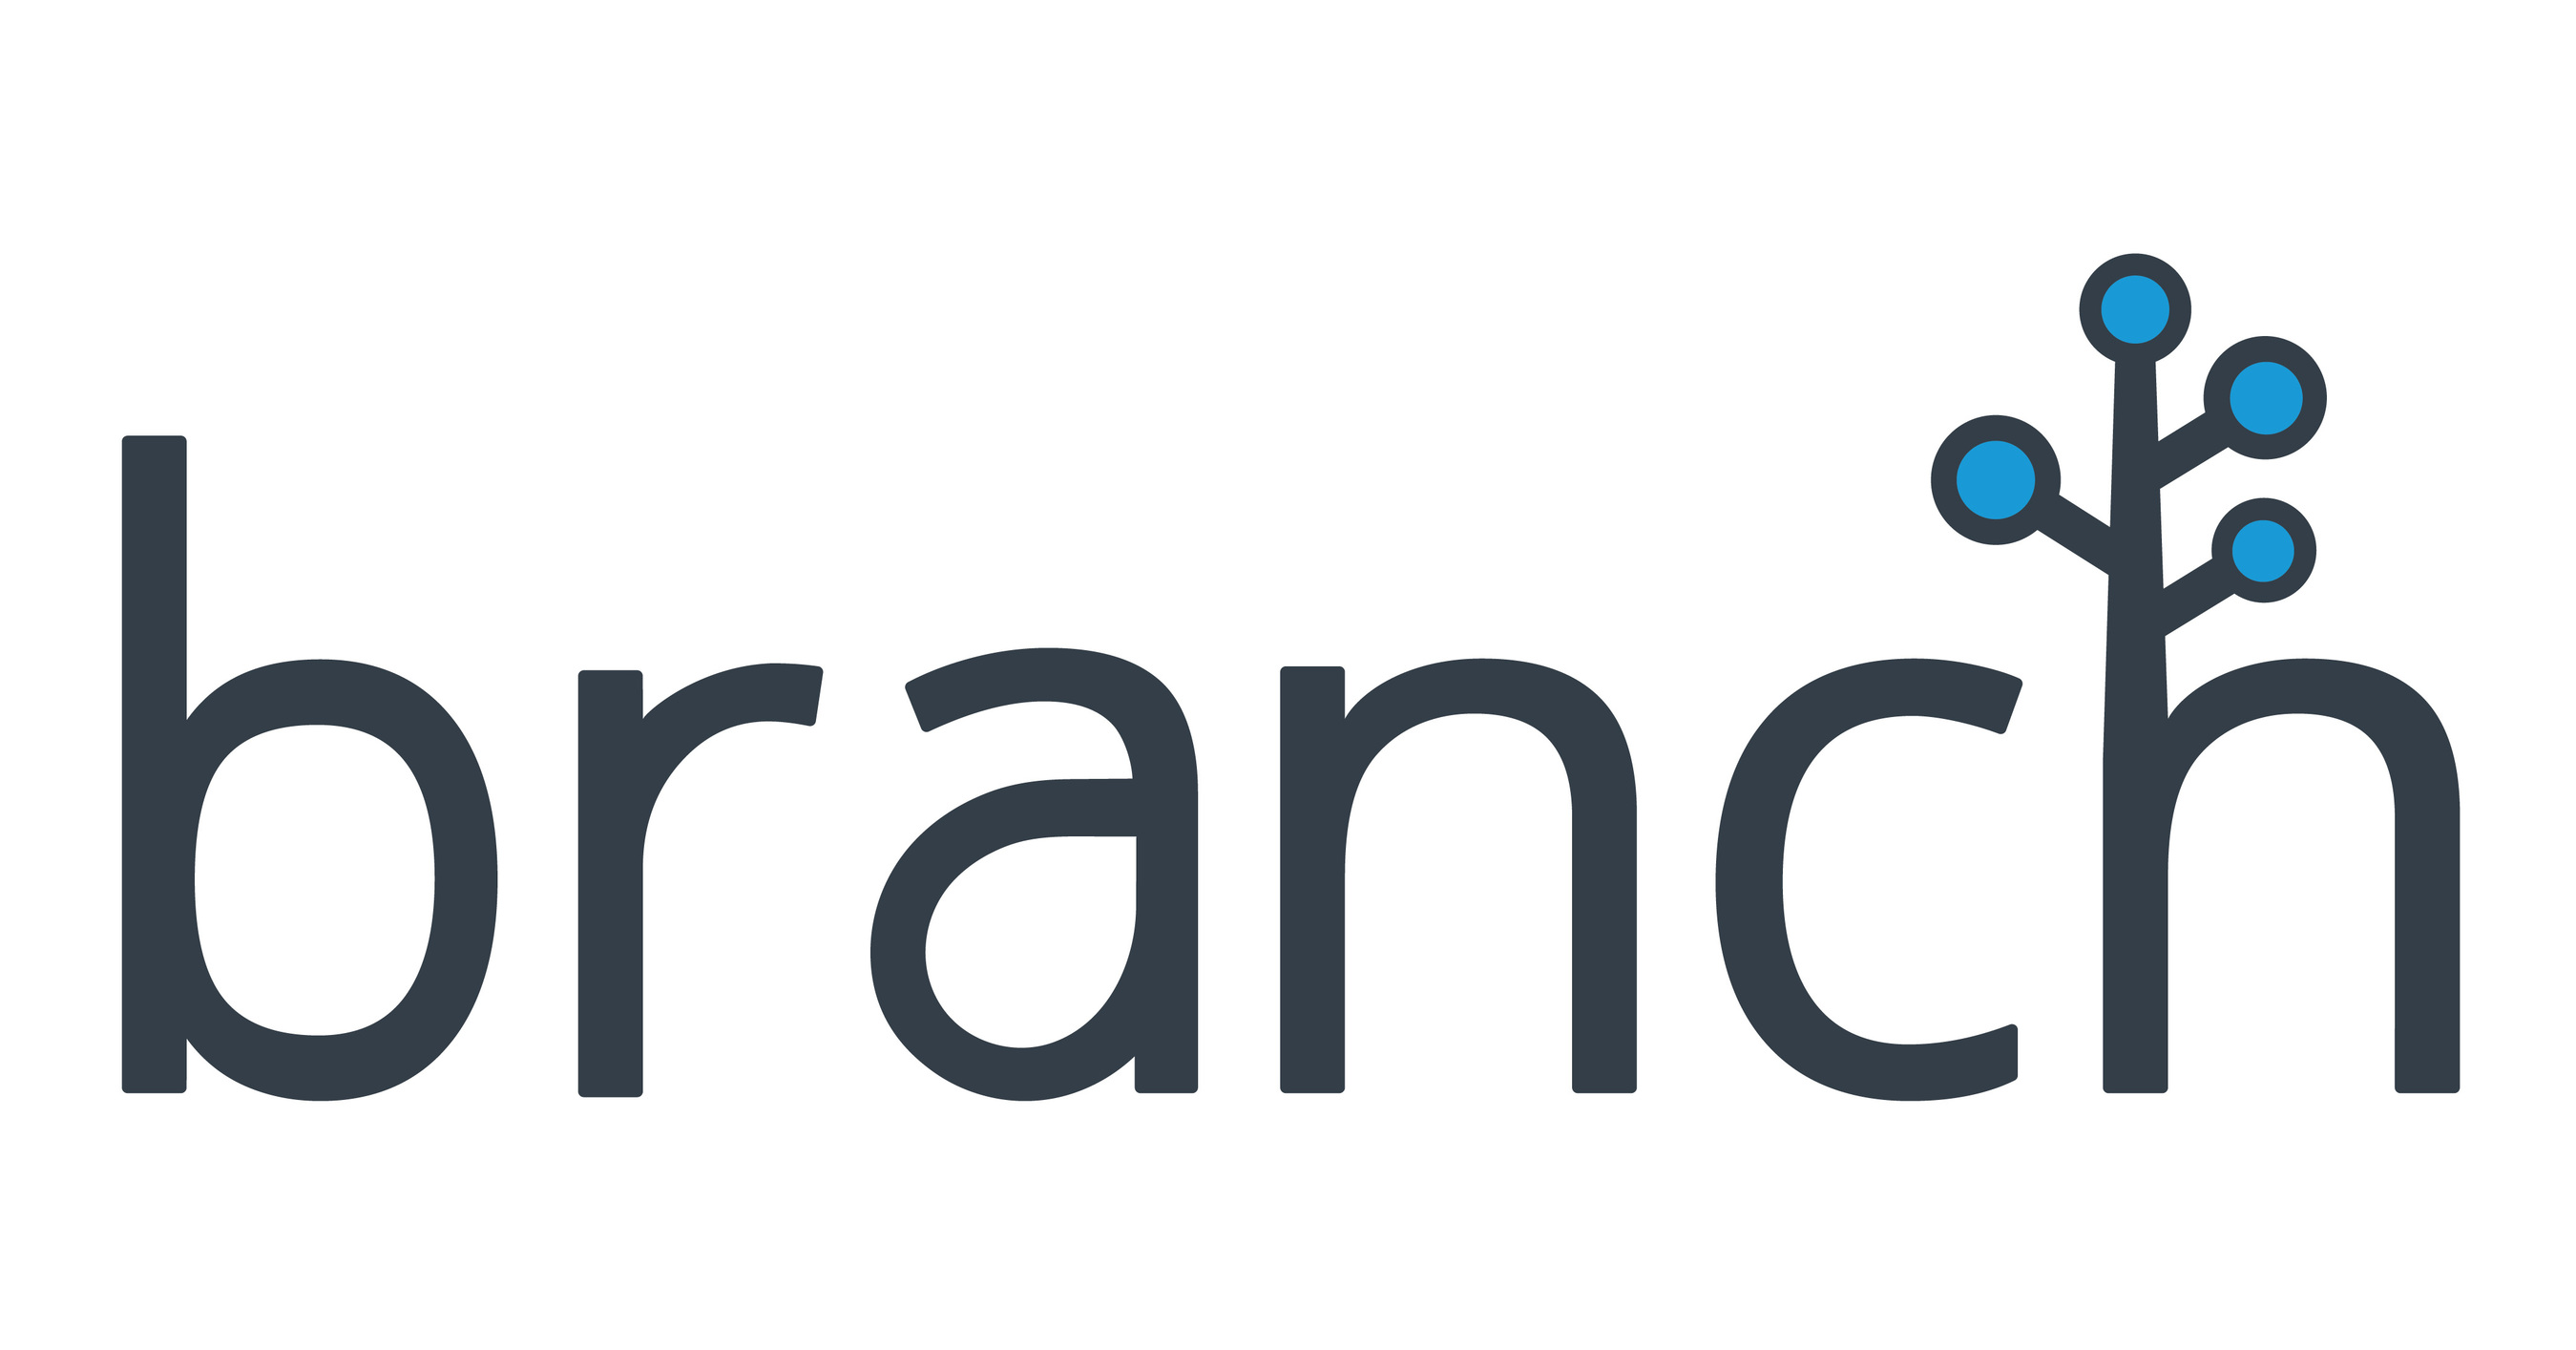 BRANCH RAISES $300 MILLION AT $4 BILLION VALUATION TO OPEN MOBILE ECOSYSTEM AND PROVIDE SOLUTION TO WALLED GARDENS